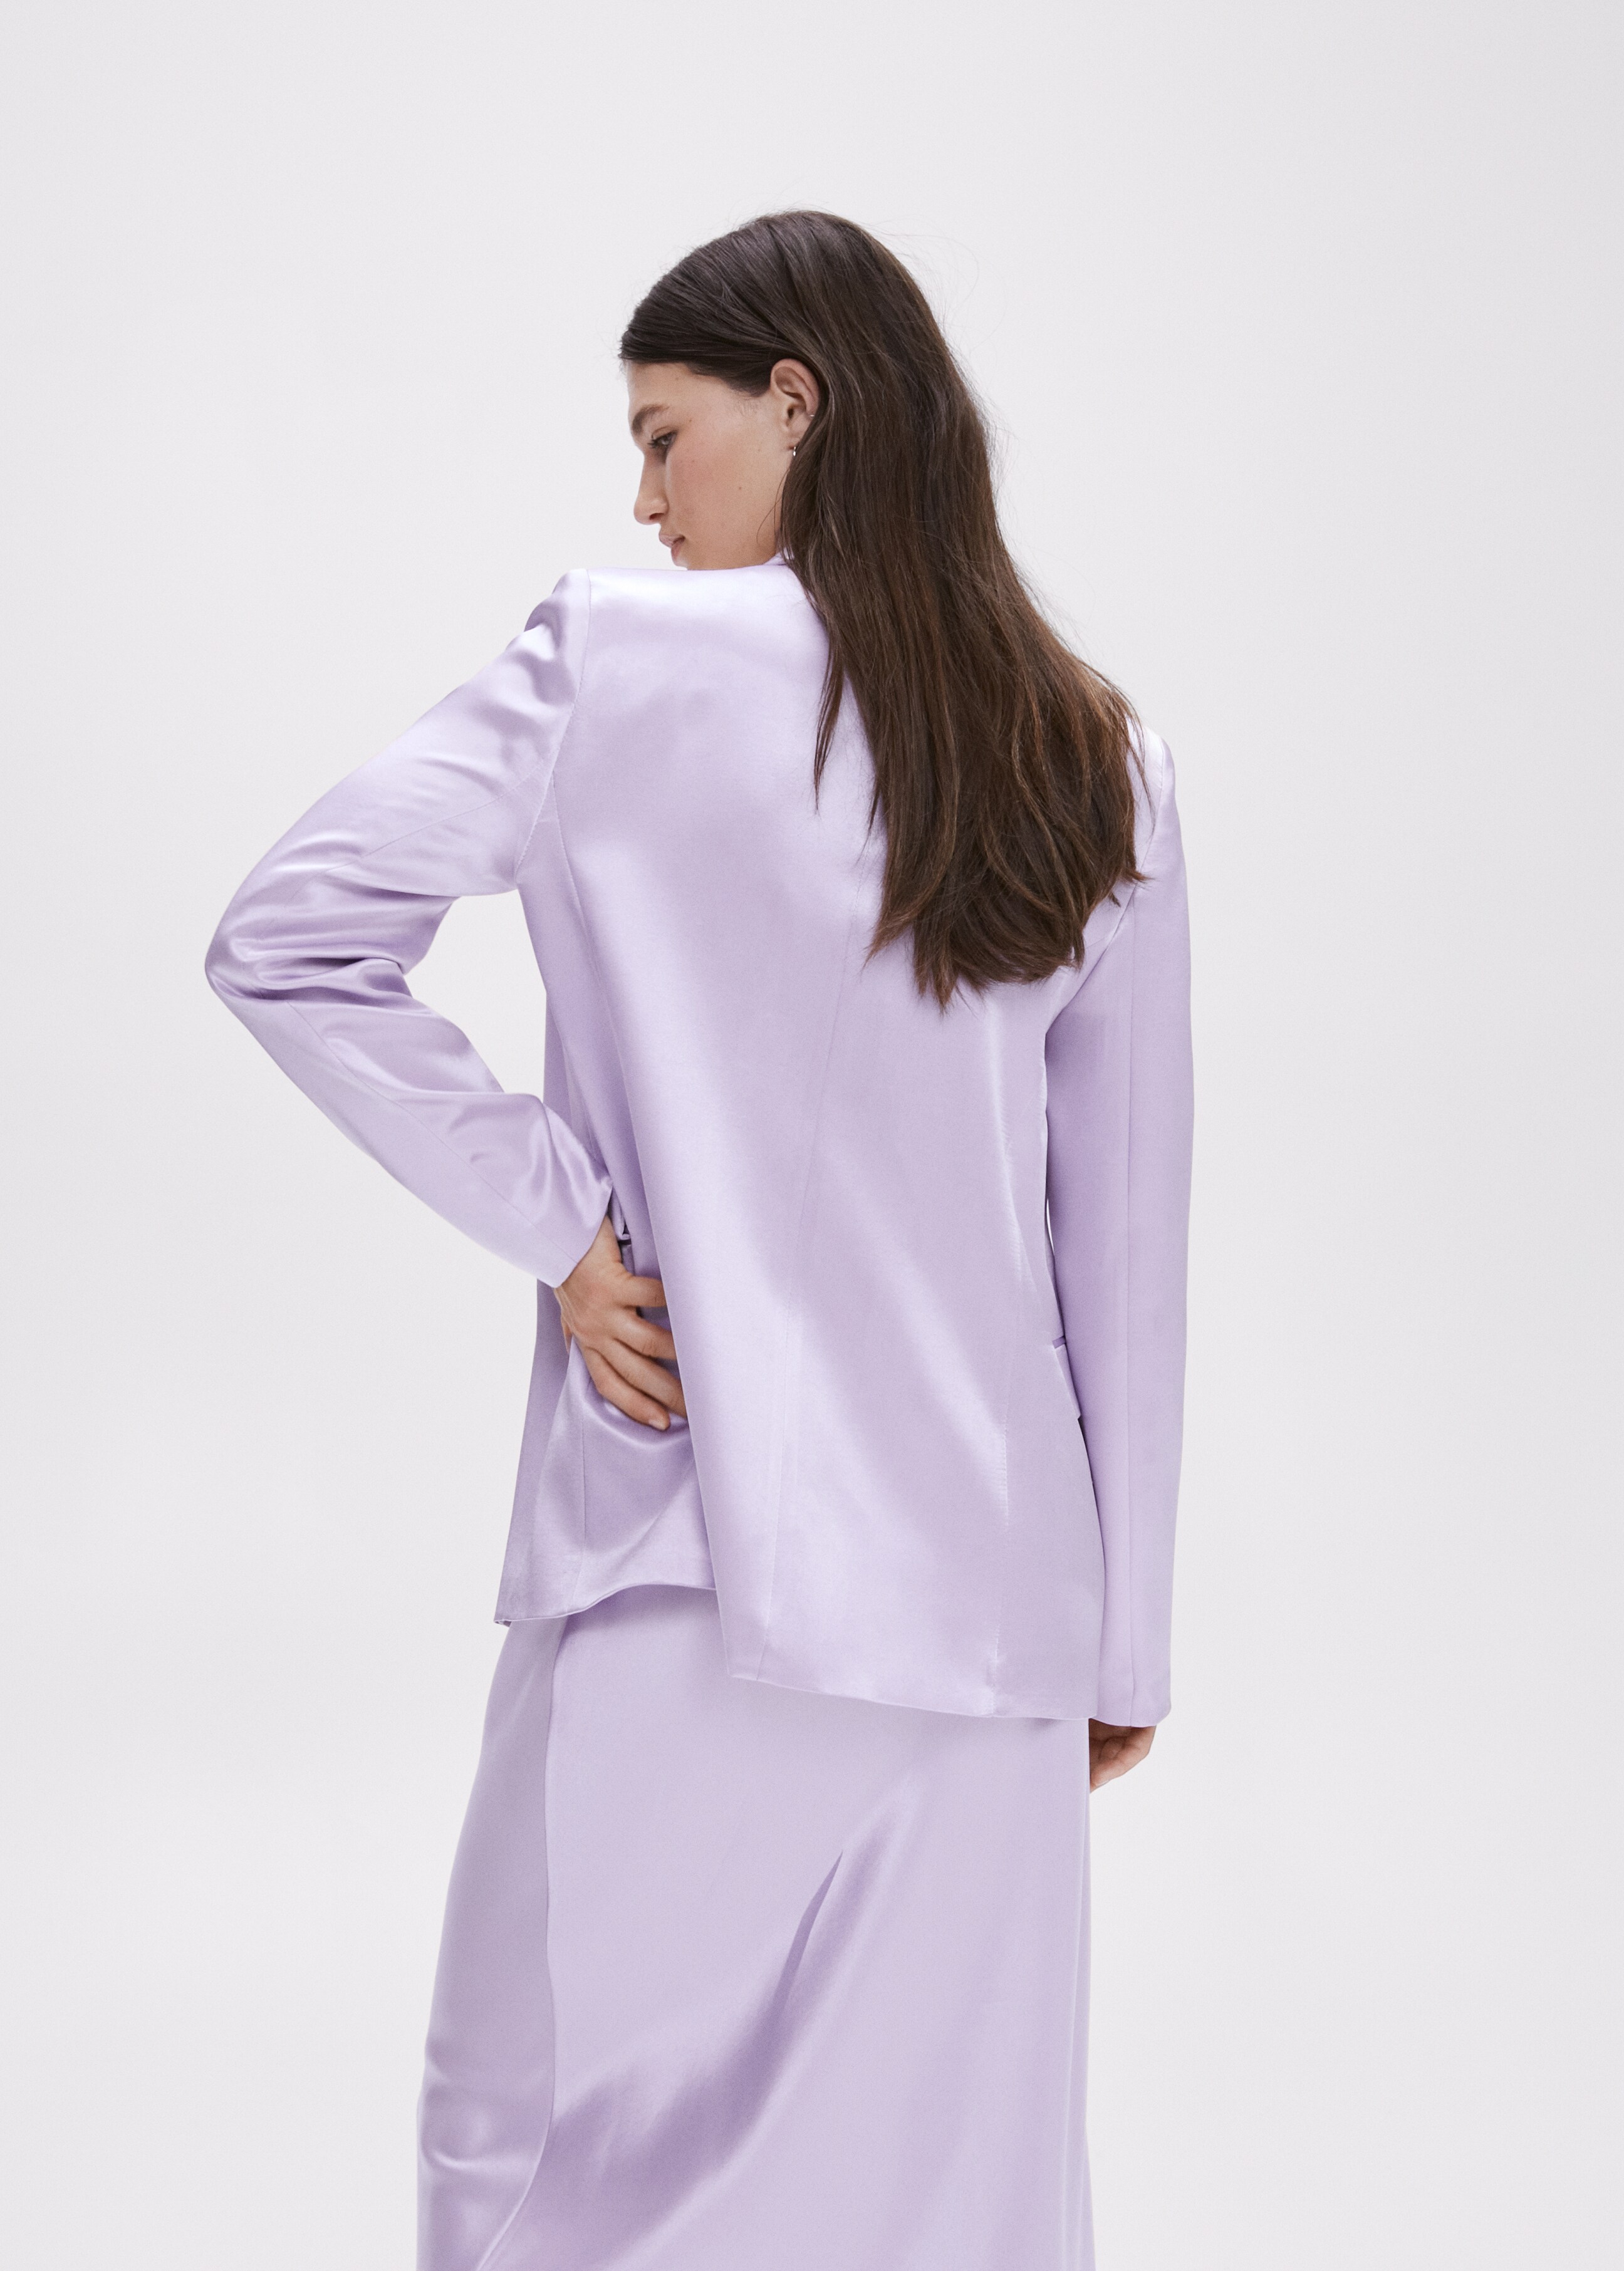 Satin-finish suit jacket - Reverse of the article